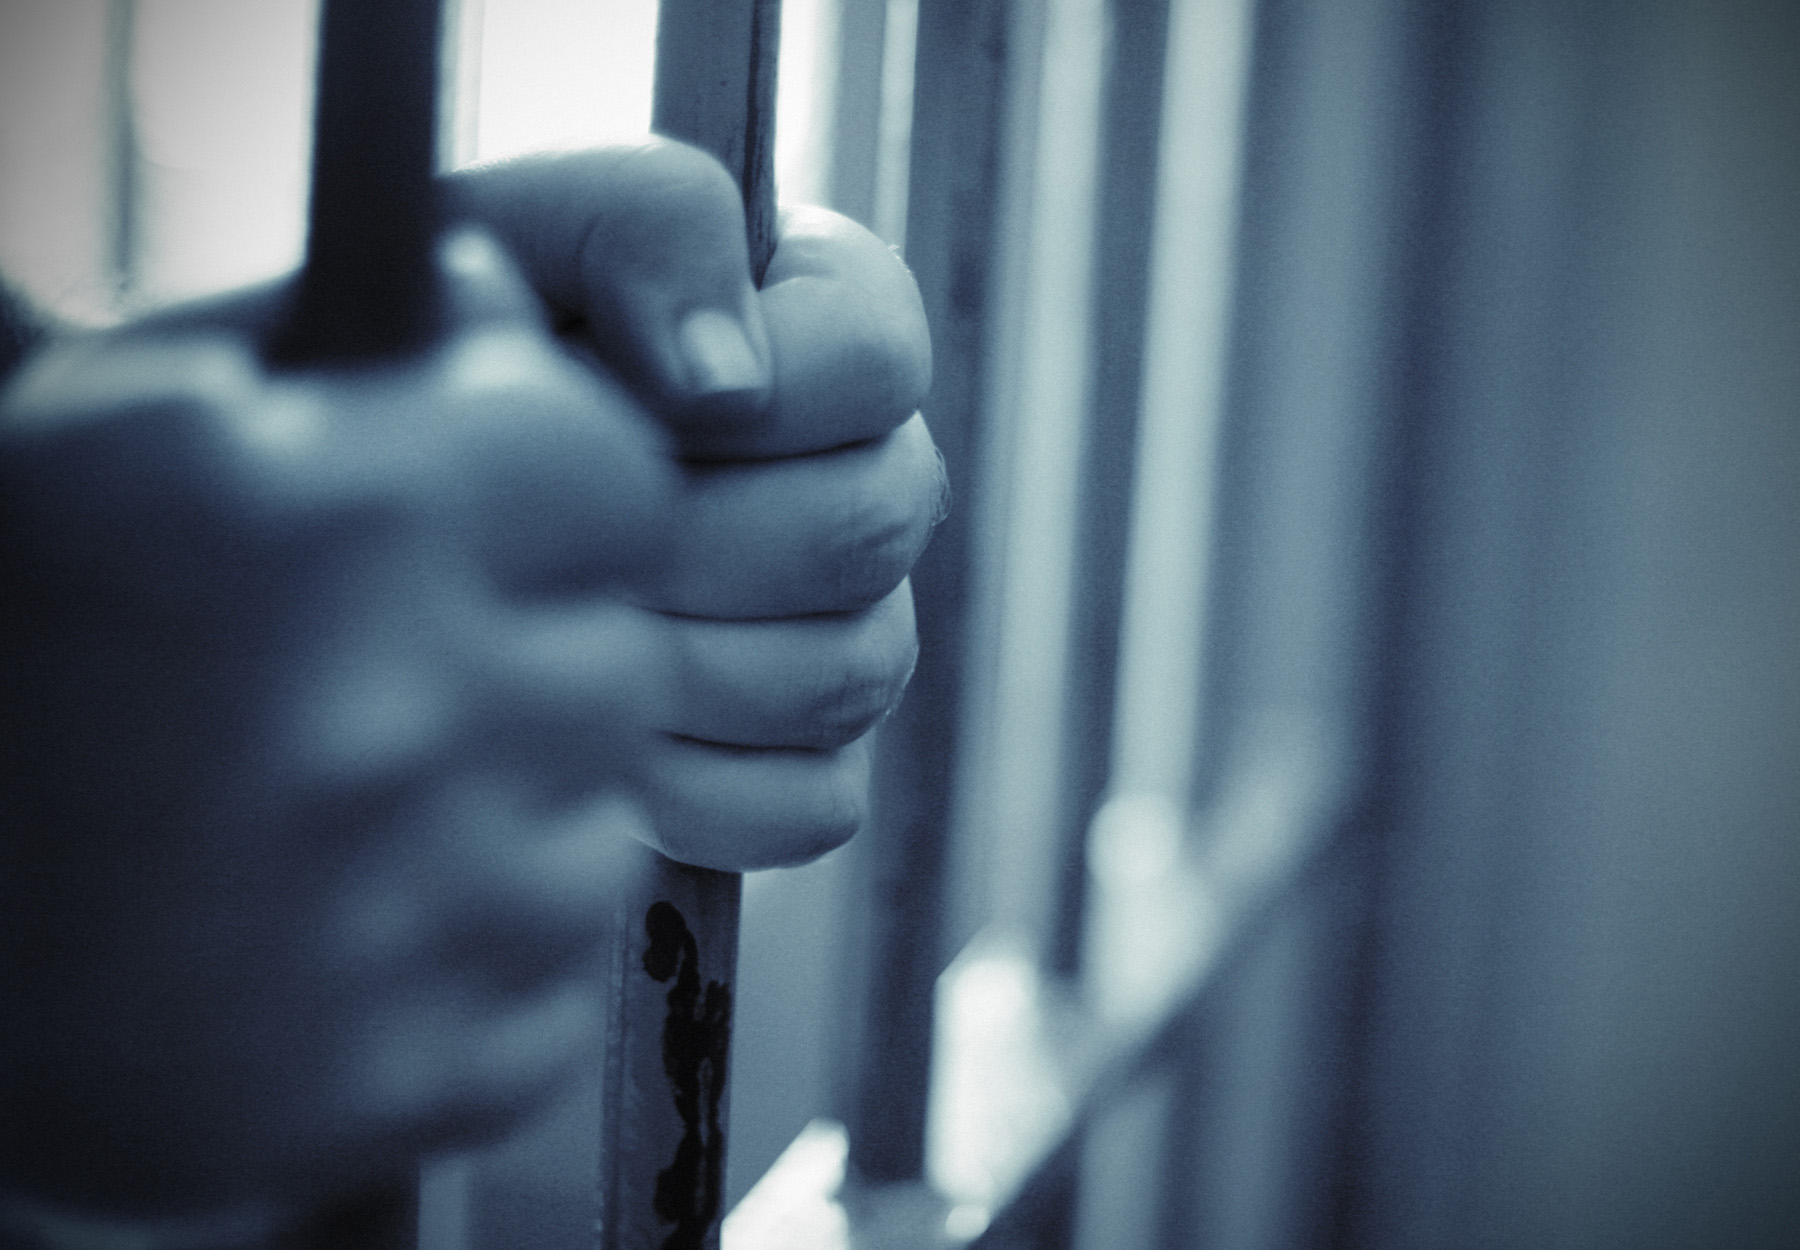 A black and white photo of hands gripping the bars of a prison cell. Stock image.